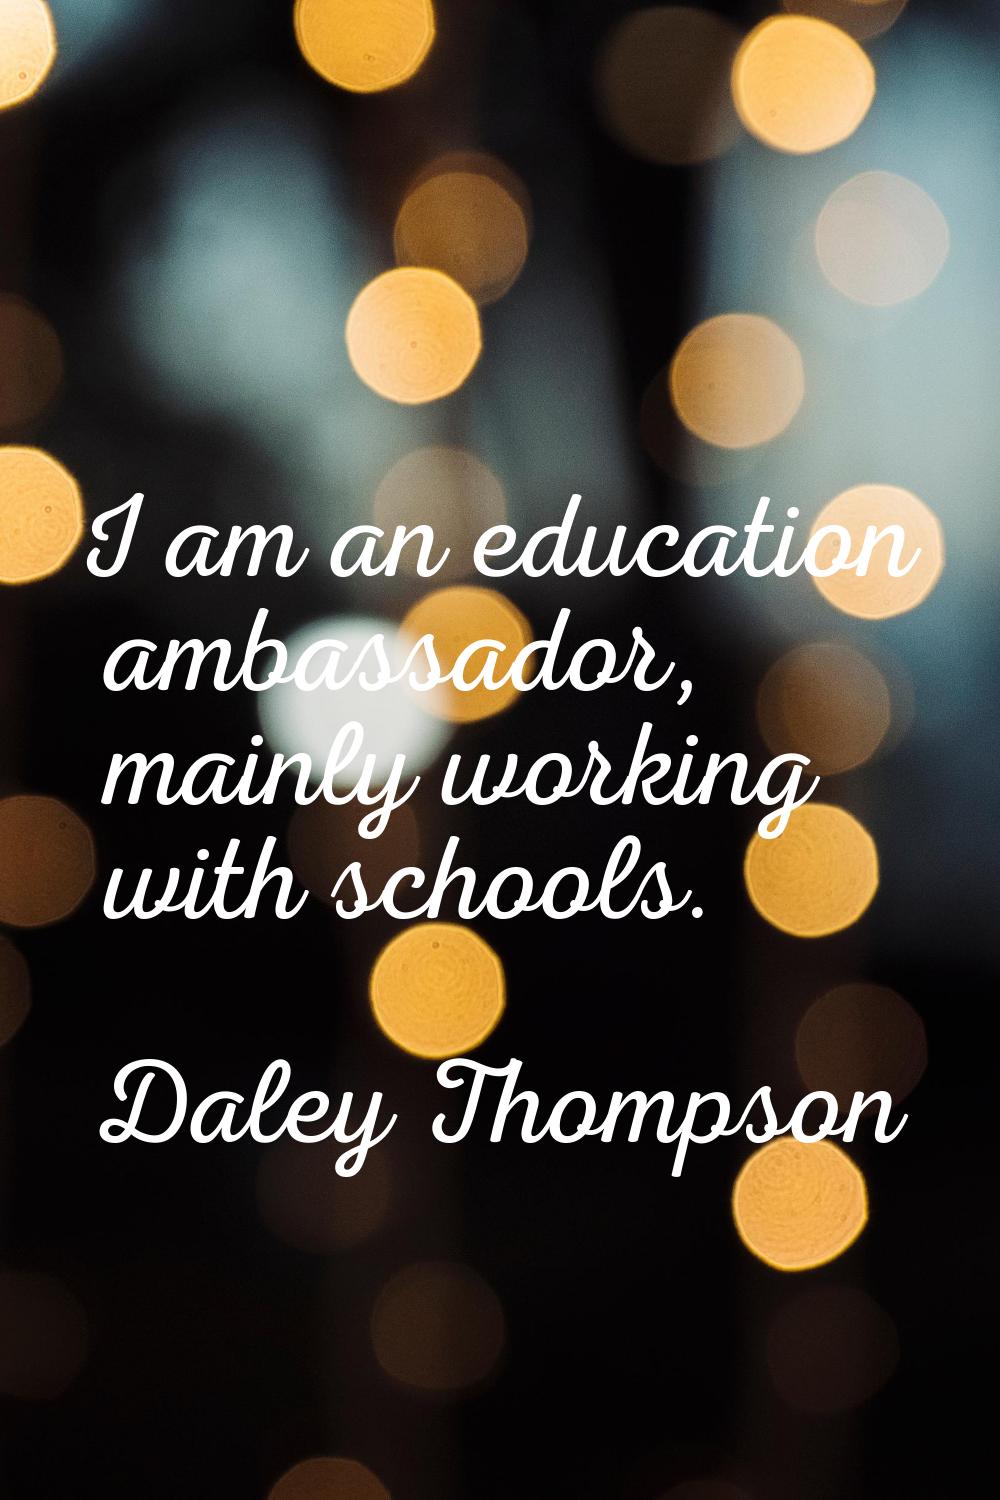 I am an education ambassador, mainly working with schools.